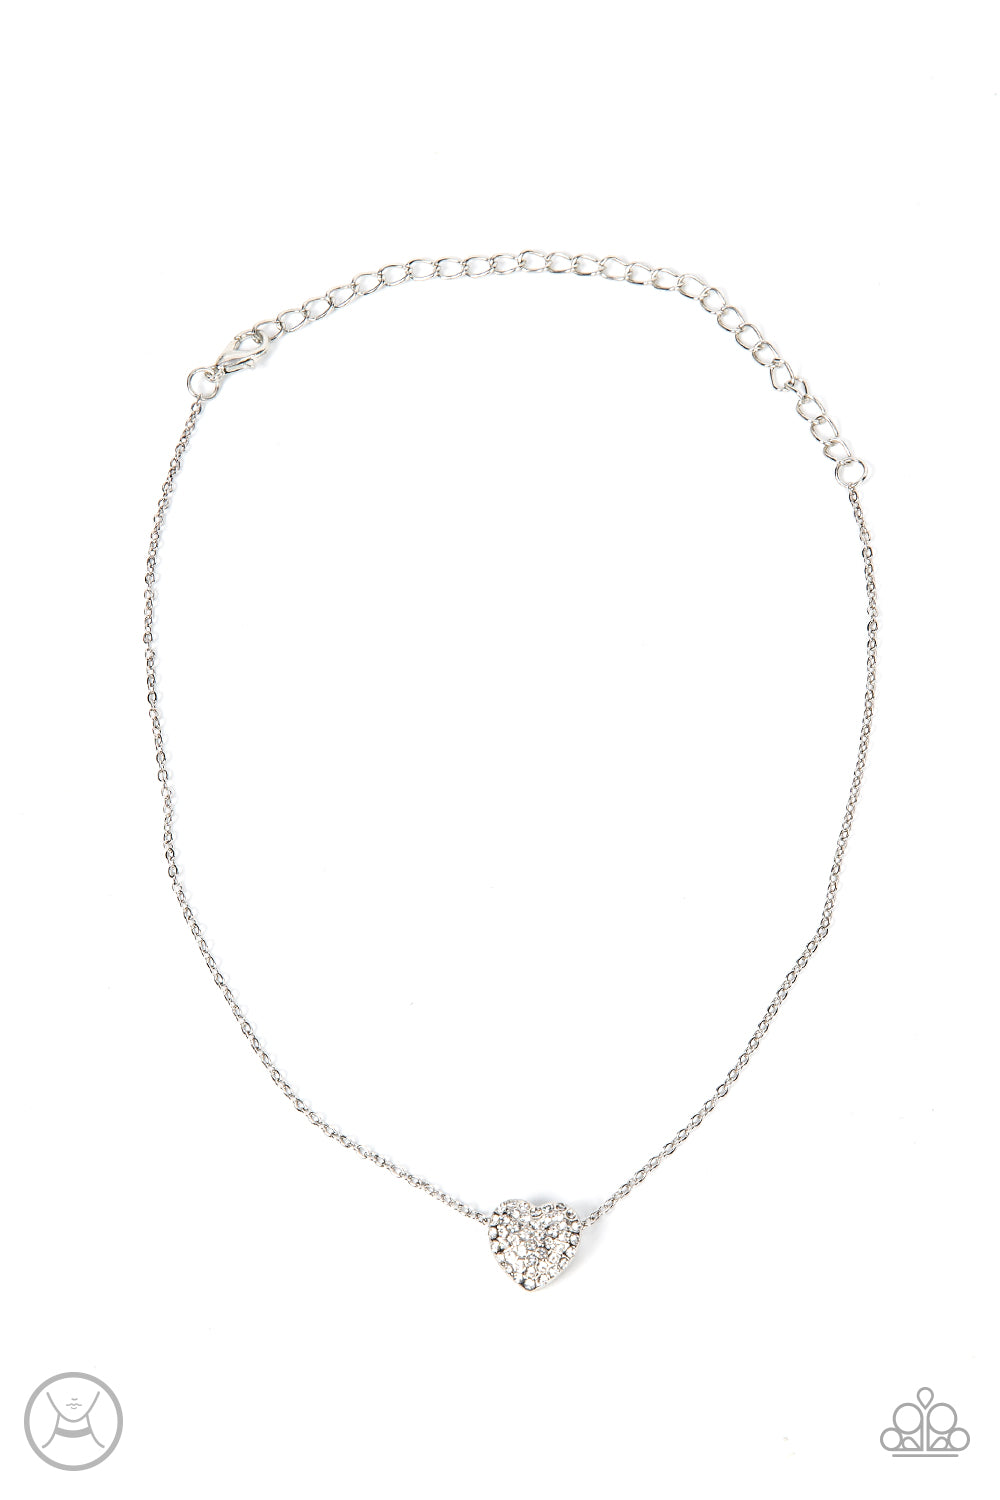 Twitterpated Twinkle - White Heart Rhinestone Choker Necklaces encrusted in glassy white rhinestones, a dainty heart frame sparkles along a dainty silver chain around the neck for a flirty finesse. Features an adjustable clasp closure.  Sold as one individual choker necklace. Includes one pair of matching earrings.